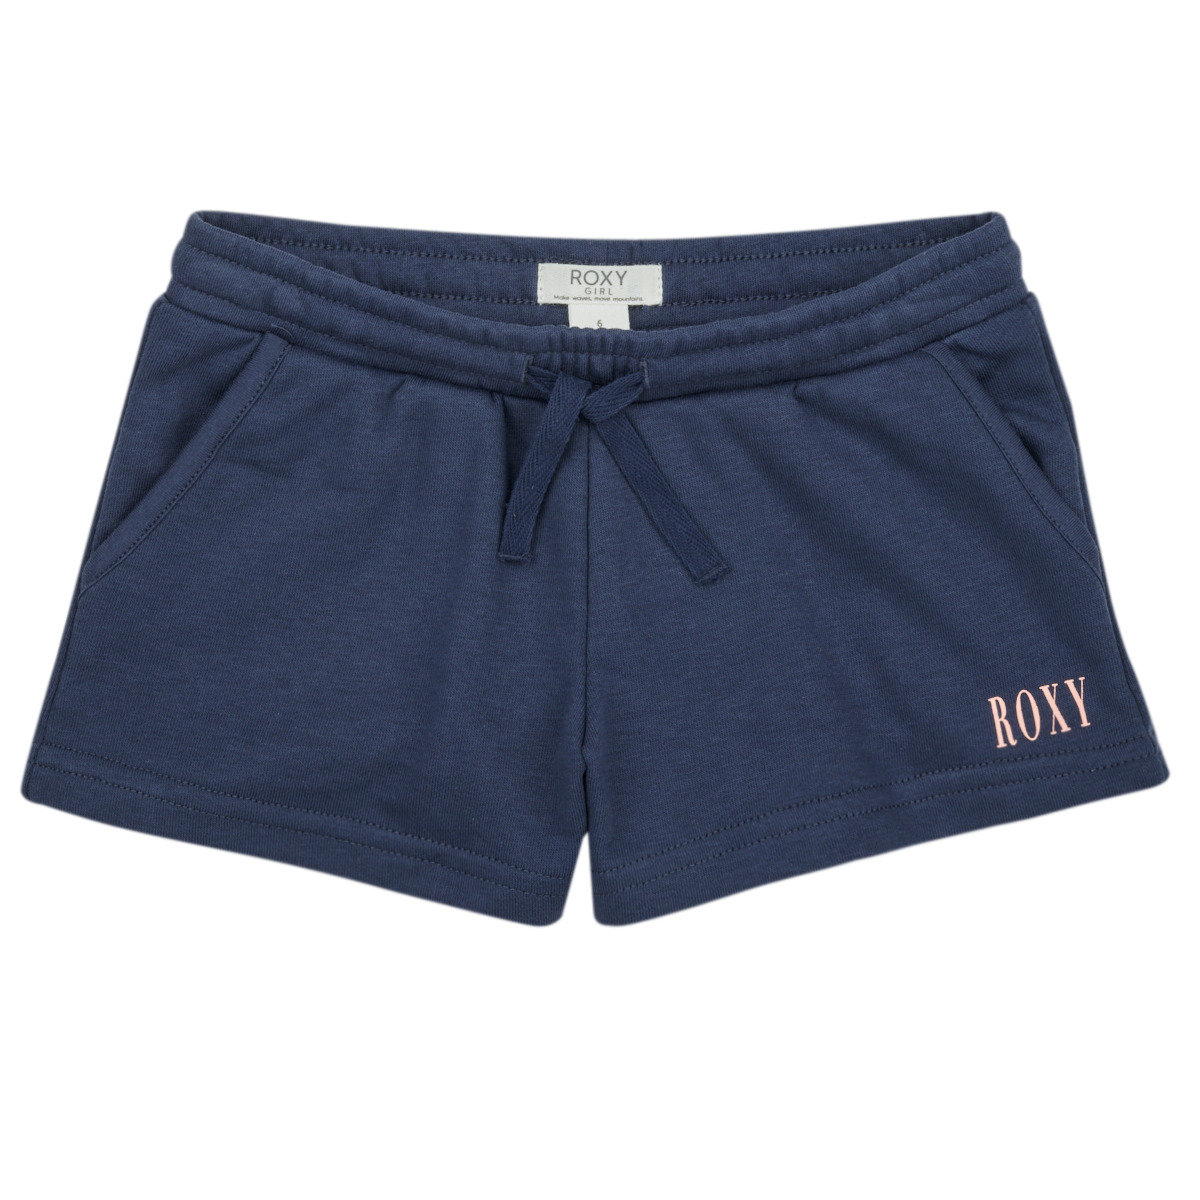 Roxy HAPPINESS FOREVER SHORT ORIGIN Marine - Free delivery | Spartoo NET !  - Clothing Shorts / Bermudas Child